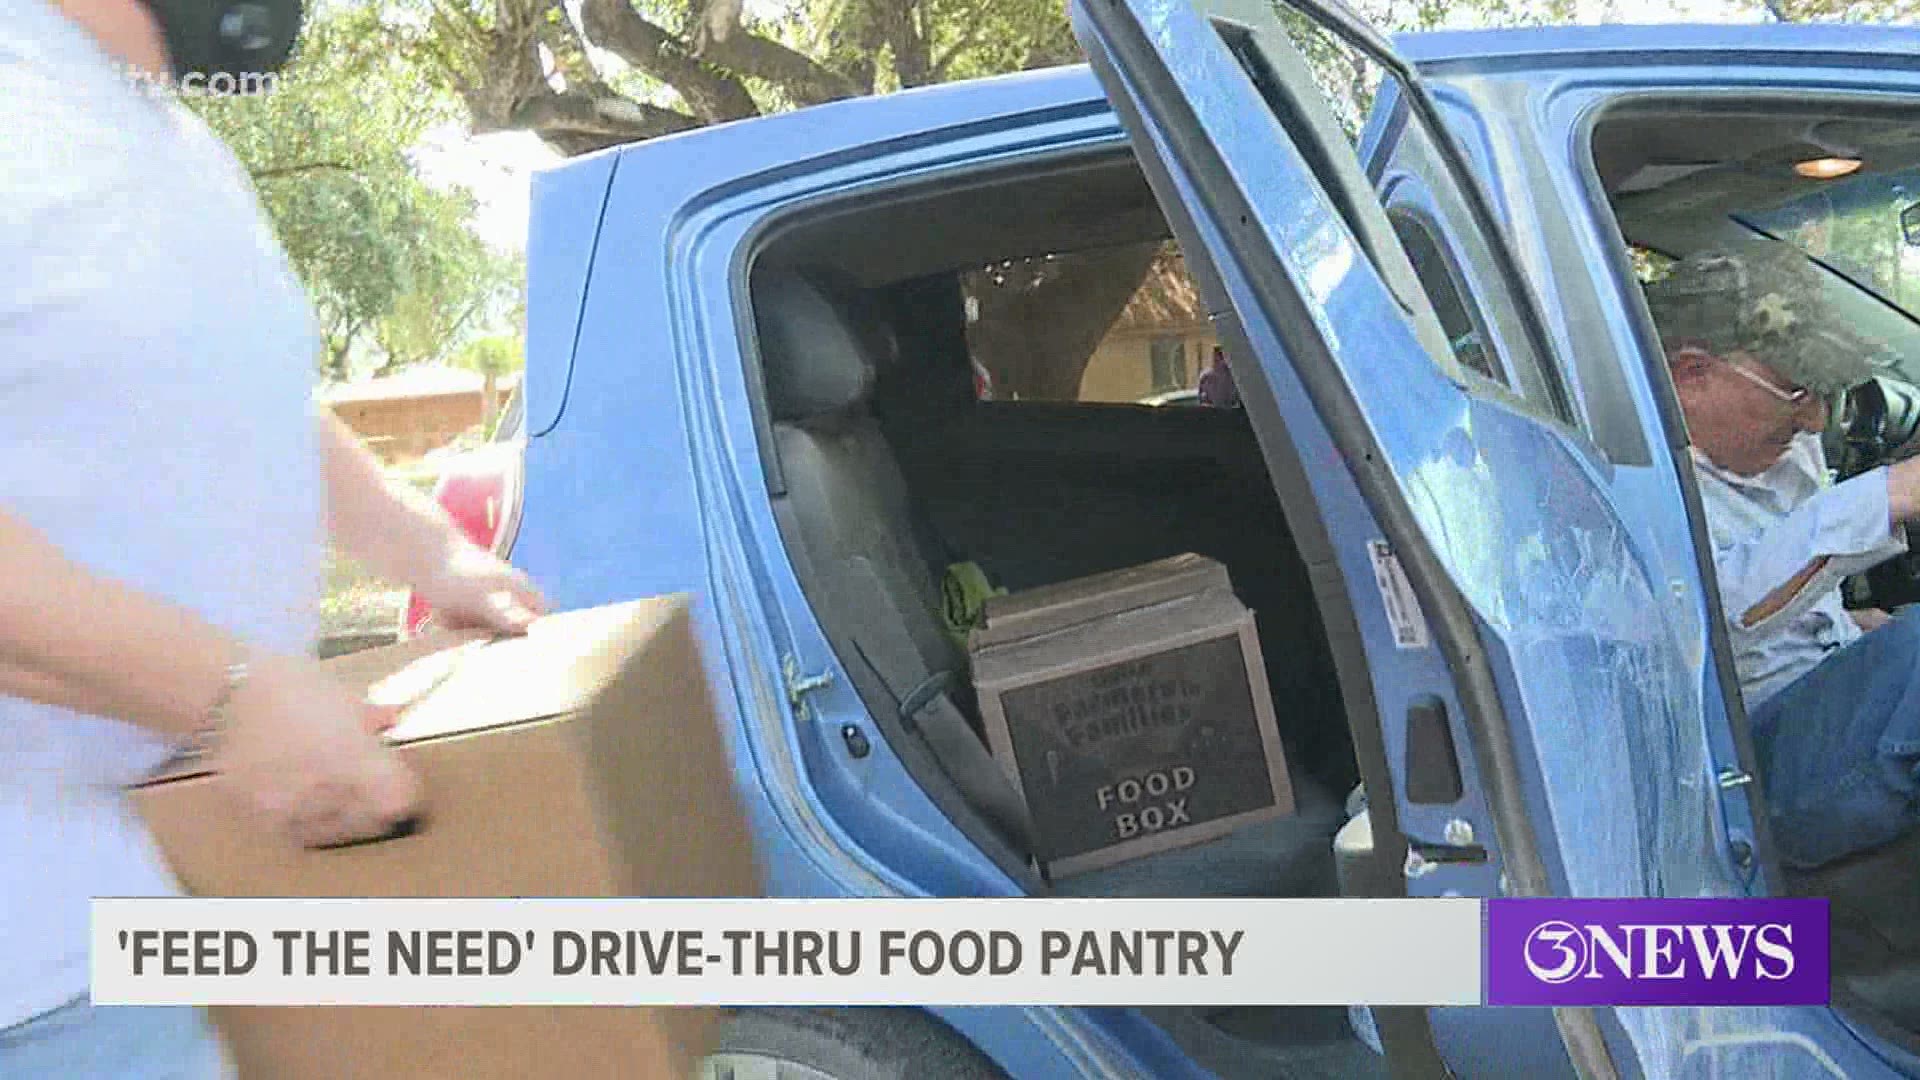 Charities embrace the holiday spirit with a contact-free food drive.